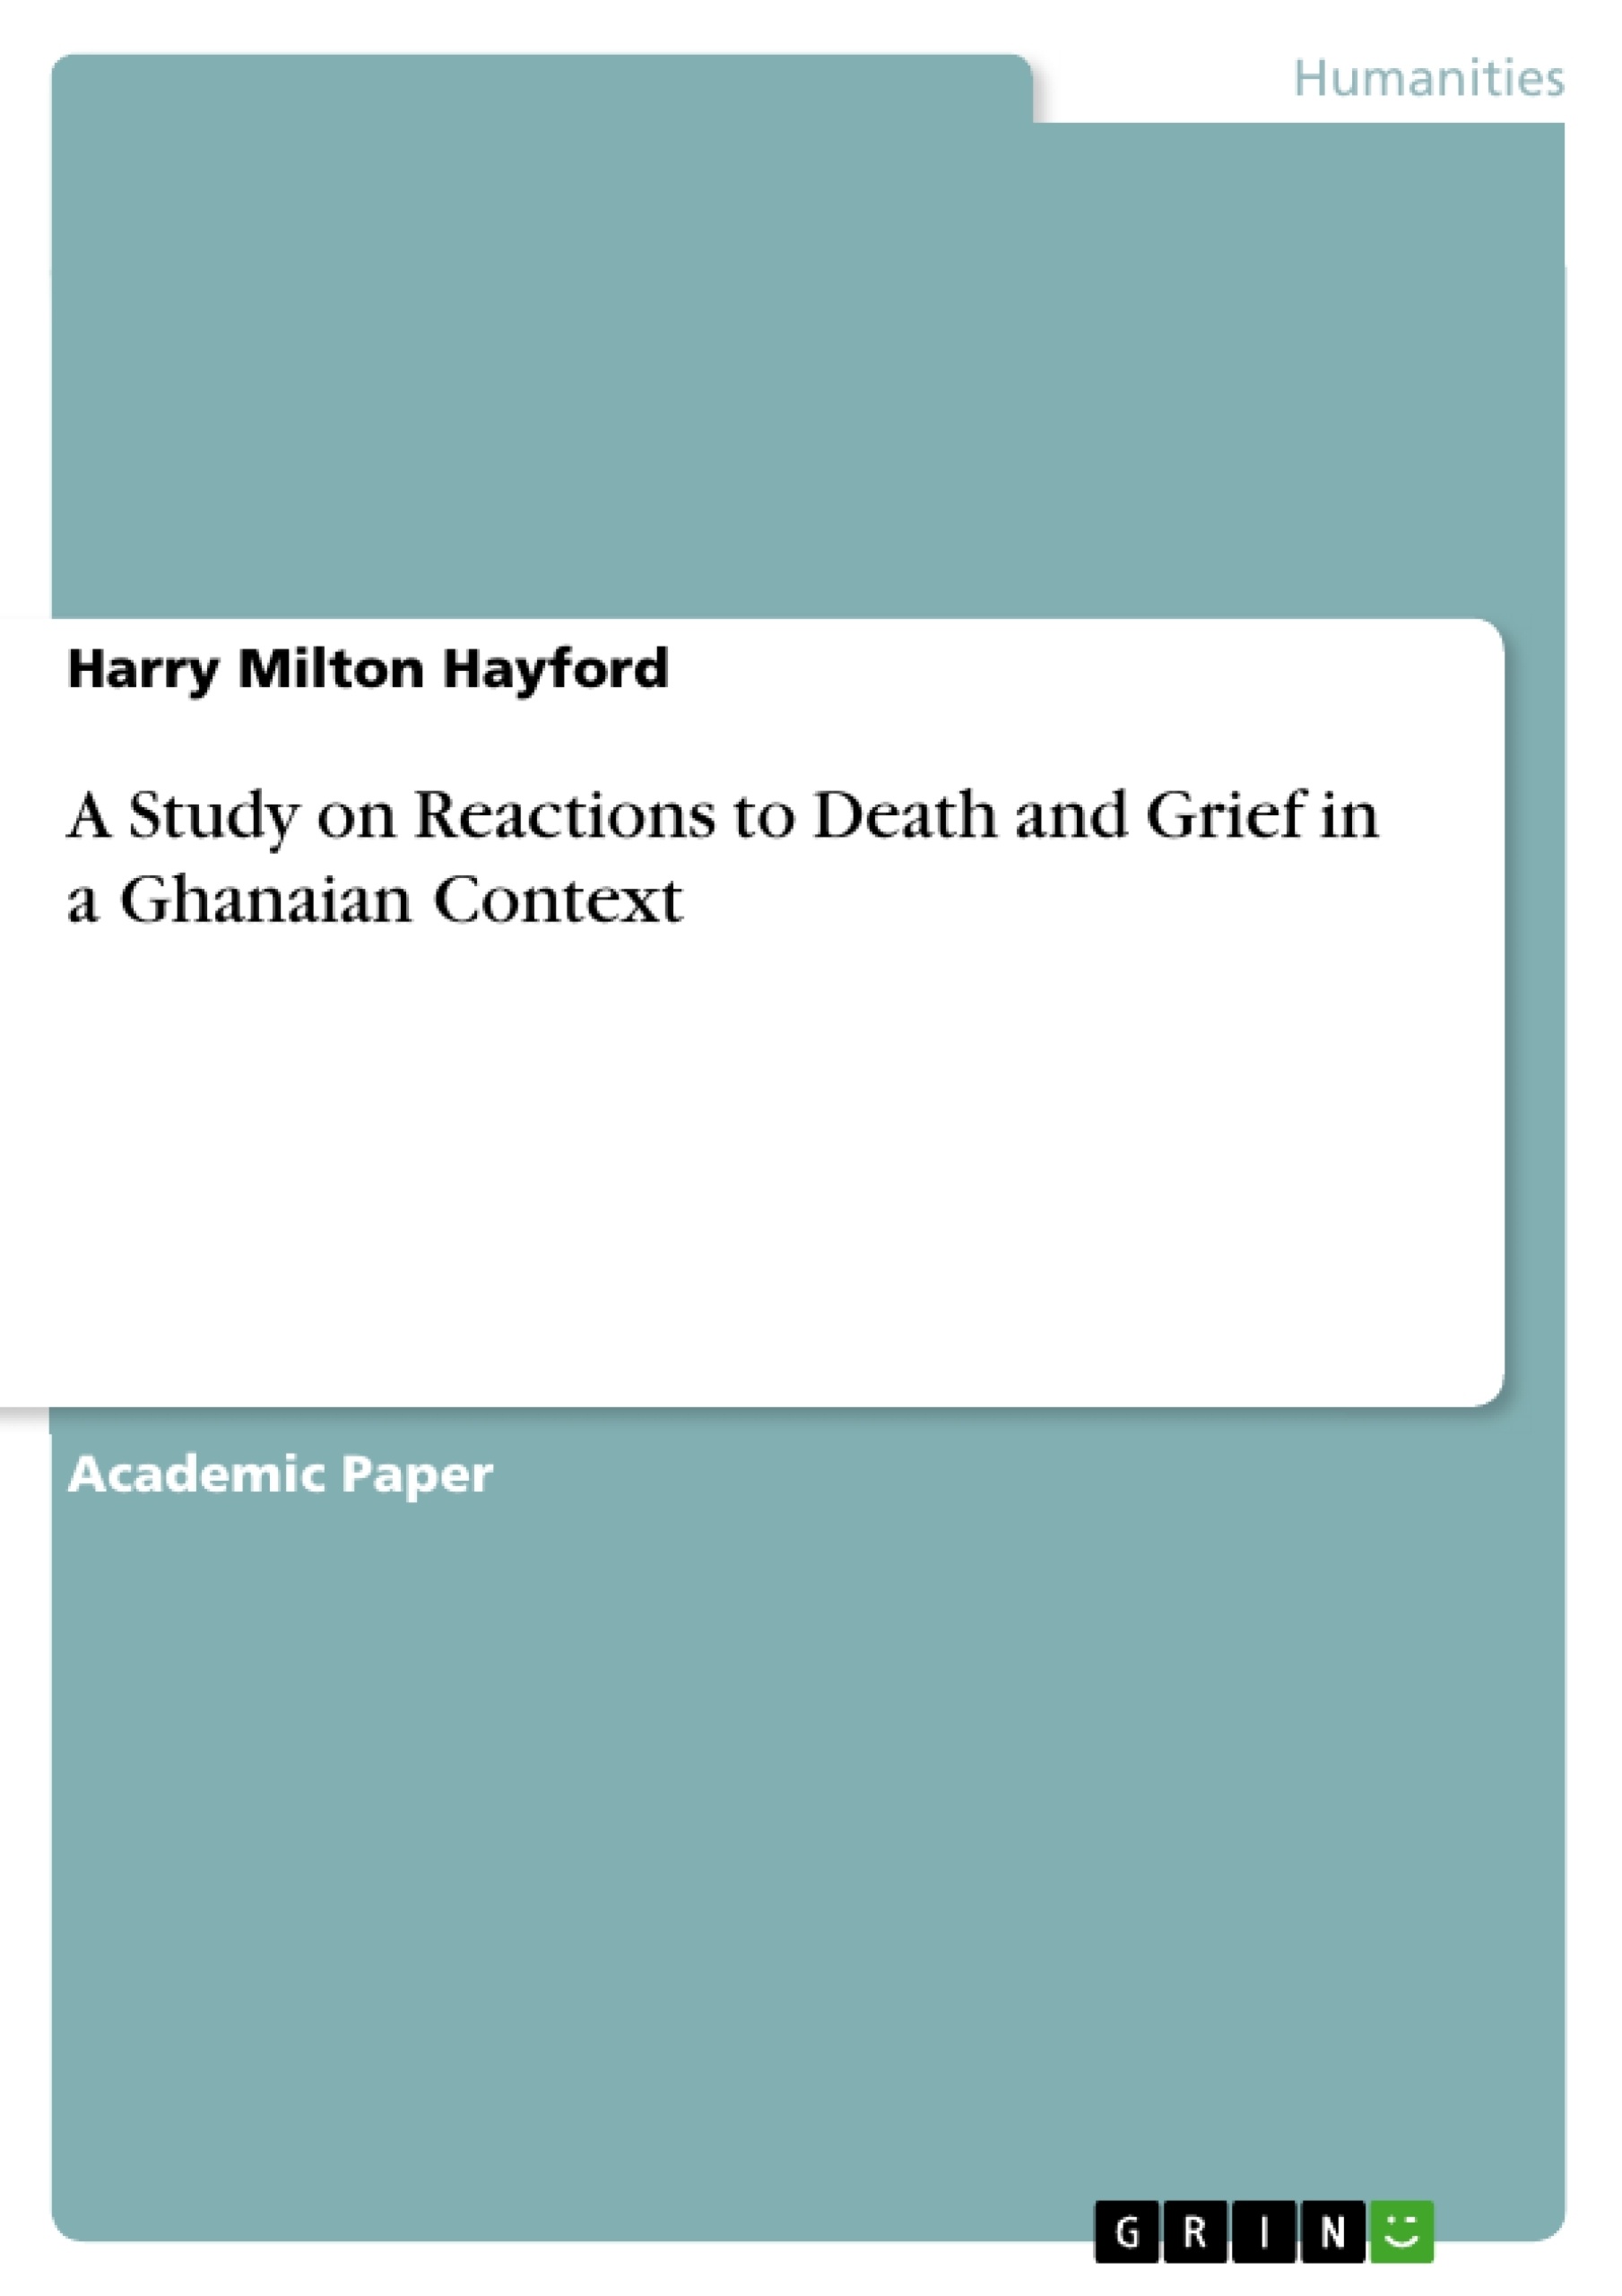 Title: A Study on Reactions to Death and Grief in a Ghanaian Context